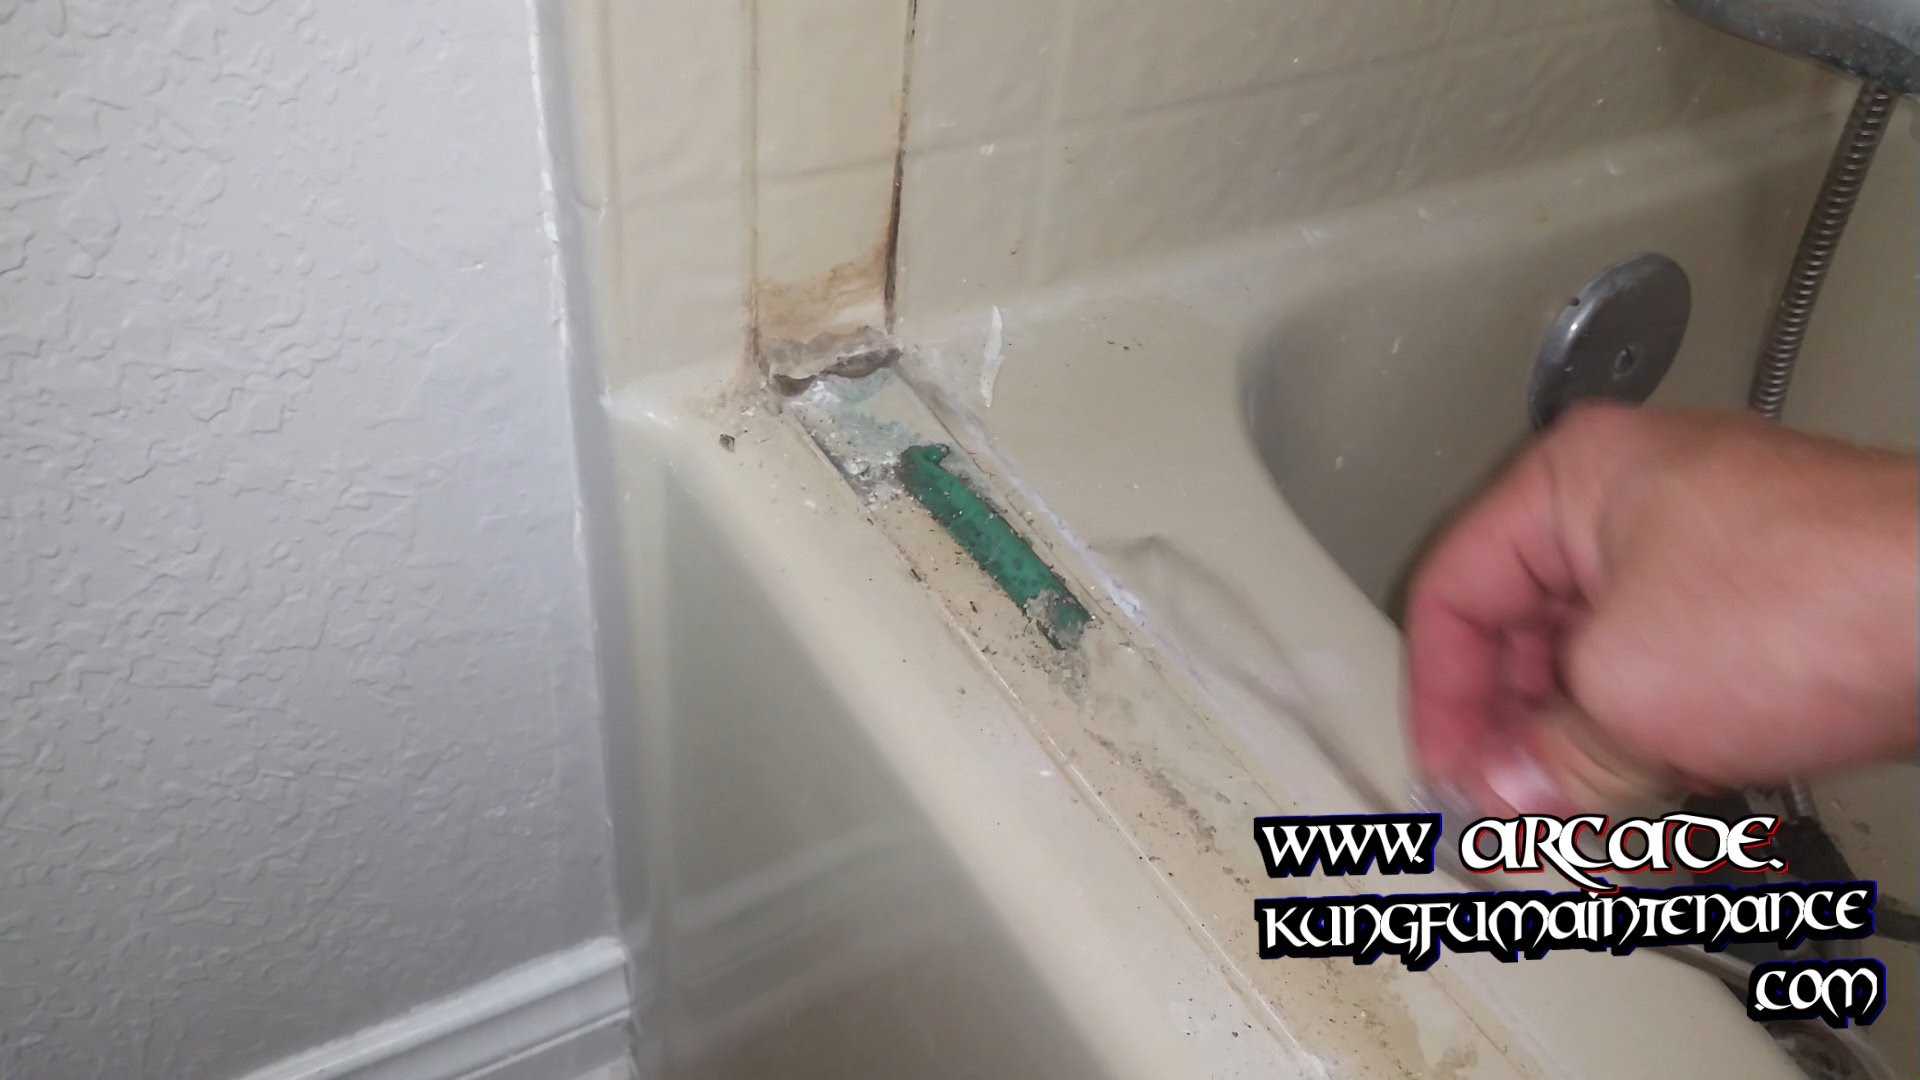 Removing Silicone Caulk Adhesive Residue After Taking Out Shower intended for dimensions 1920 X 1080